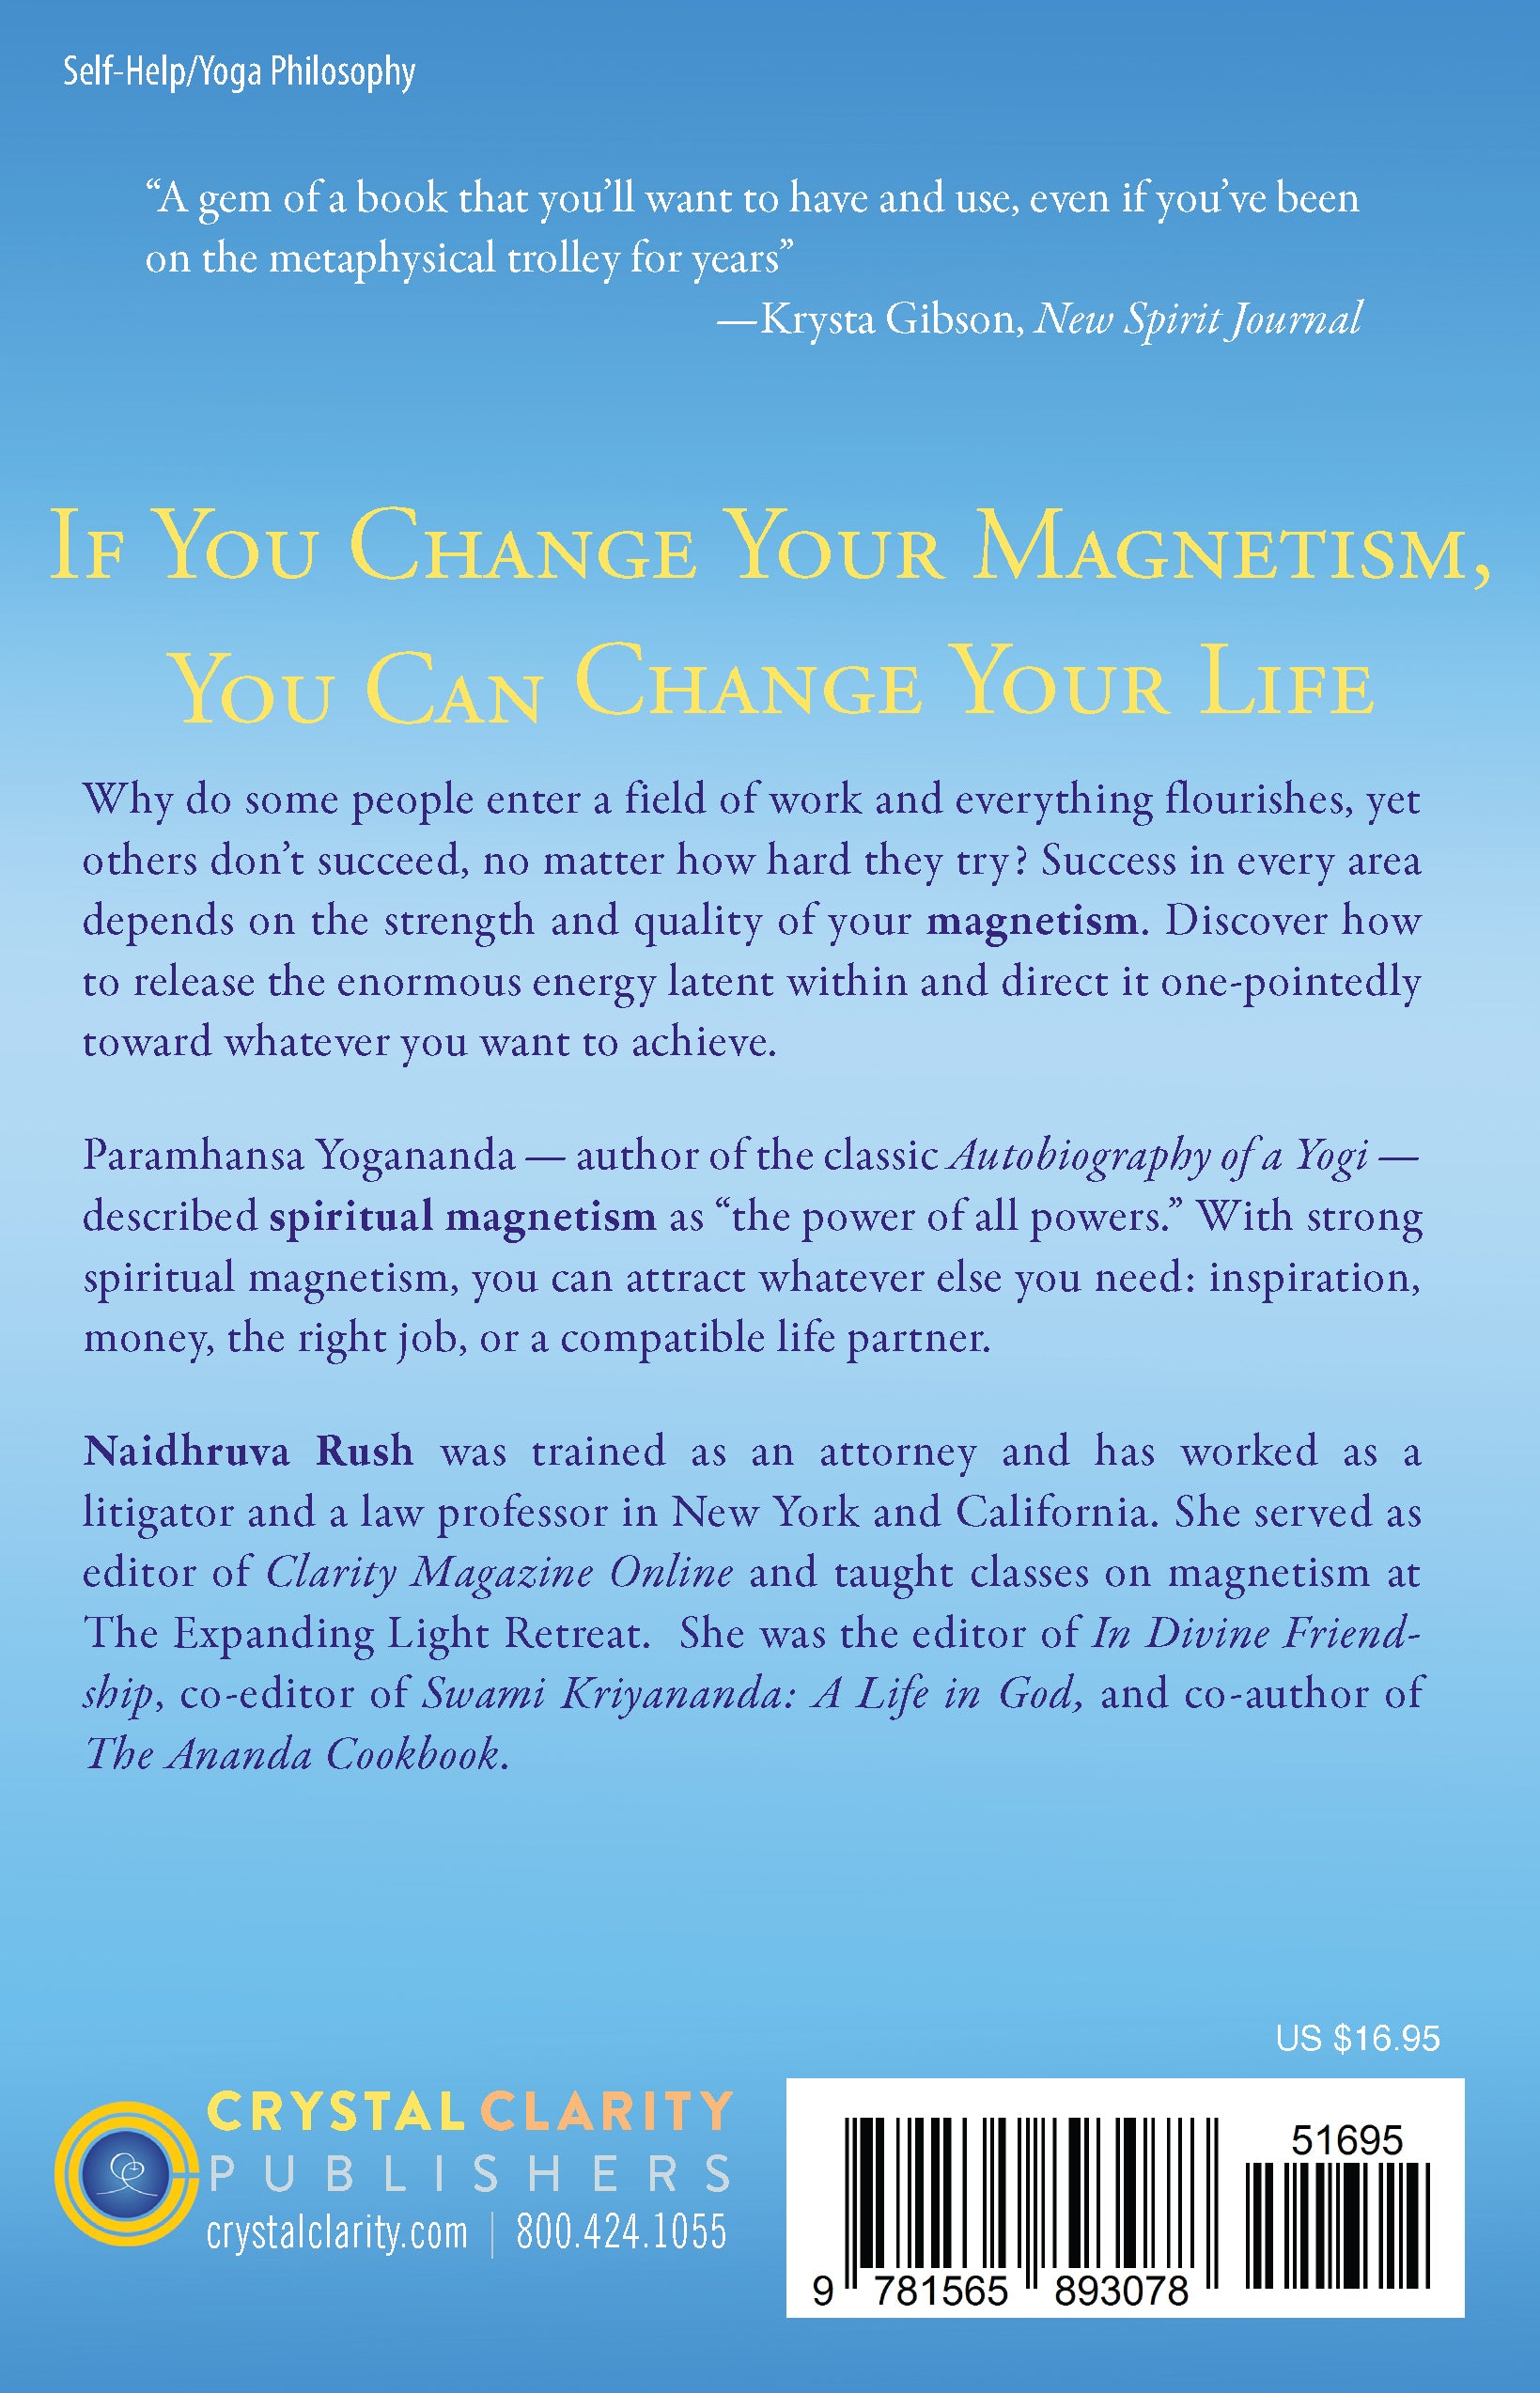 Change Your Magnetism, Change Your Life